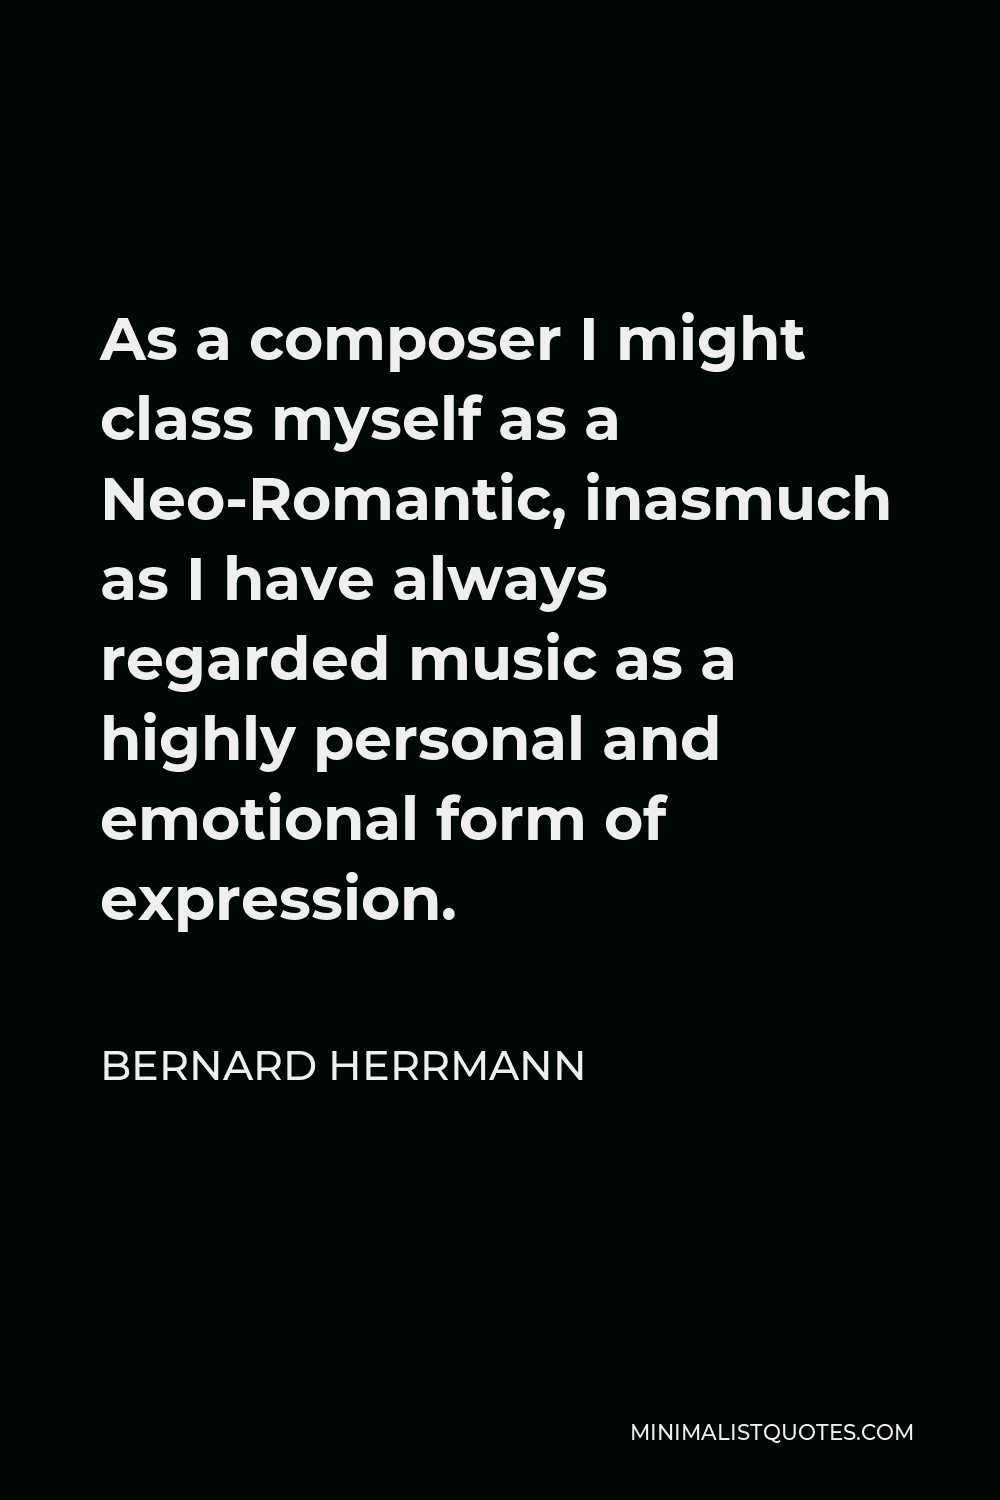 Bernard Herrmann Quote - As a composer I might class myself as a Neo-Romantic, inasmuch as I have always regarded music as a highly personal and emotional form of expression.